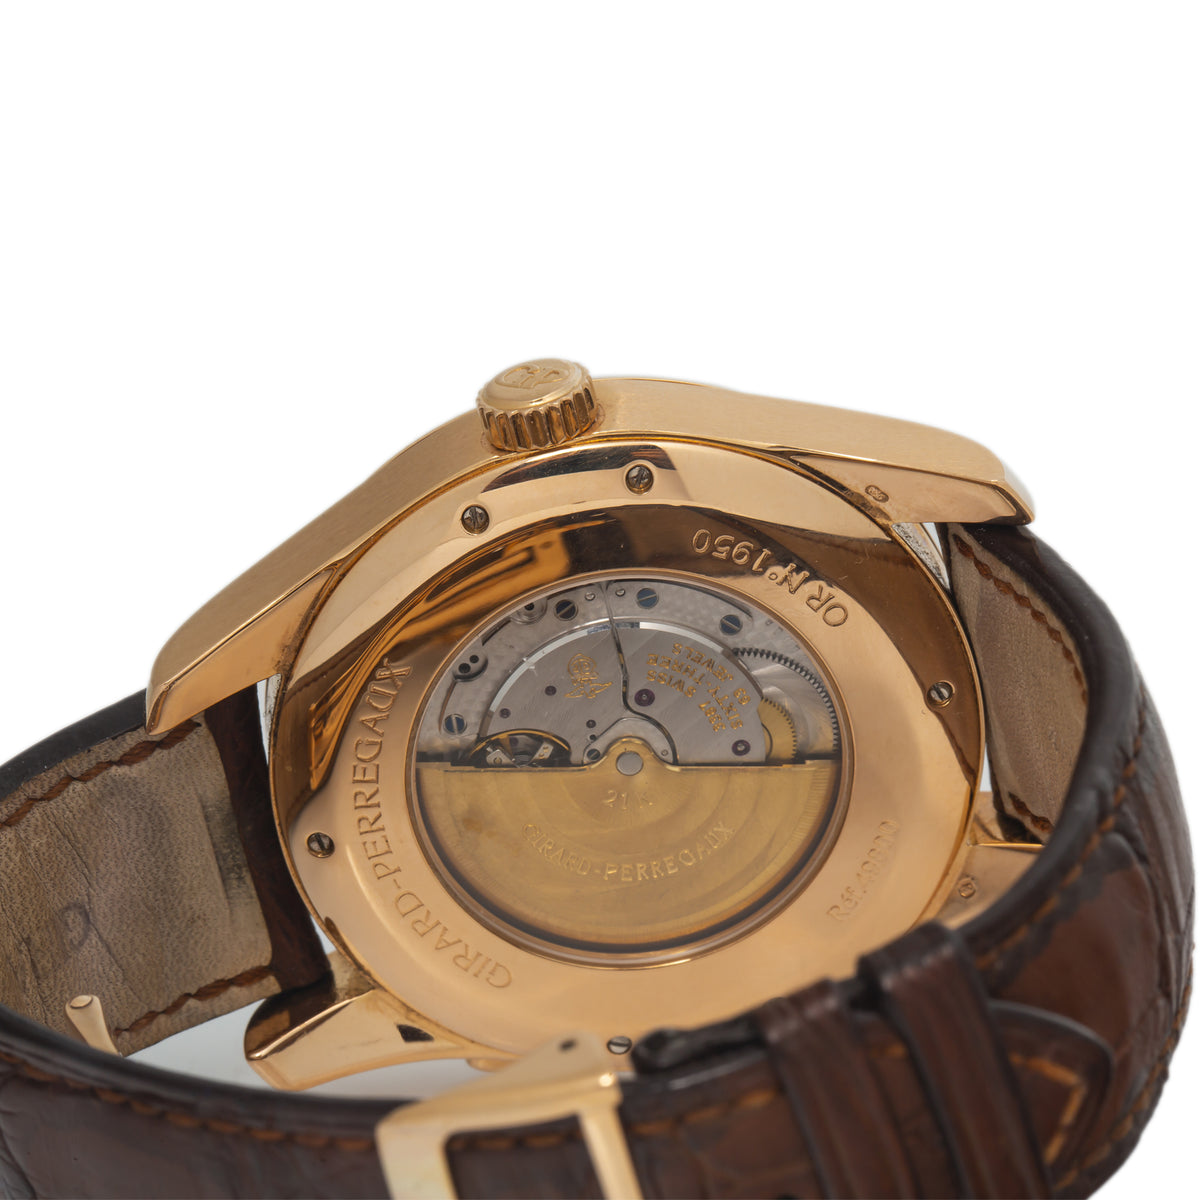 Girard Perragaux Worldwide Time Control 49800 18k Rose Gold Automatic Watch 43mm